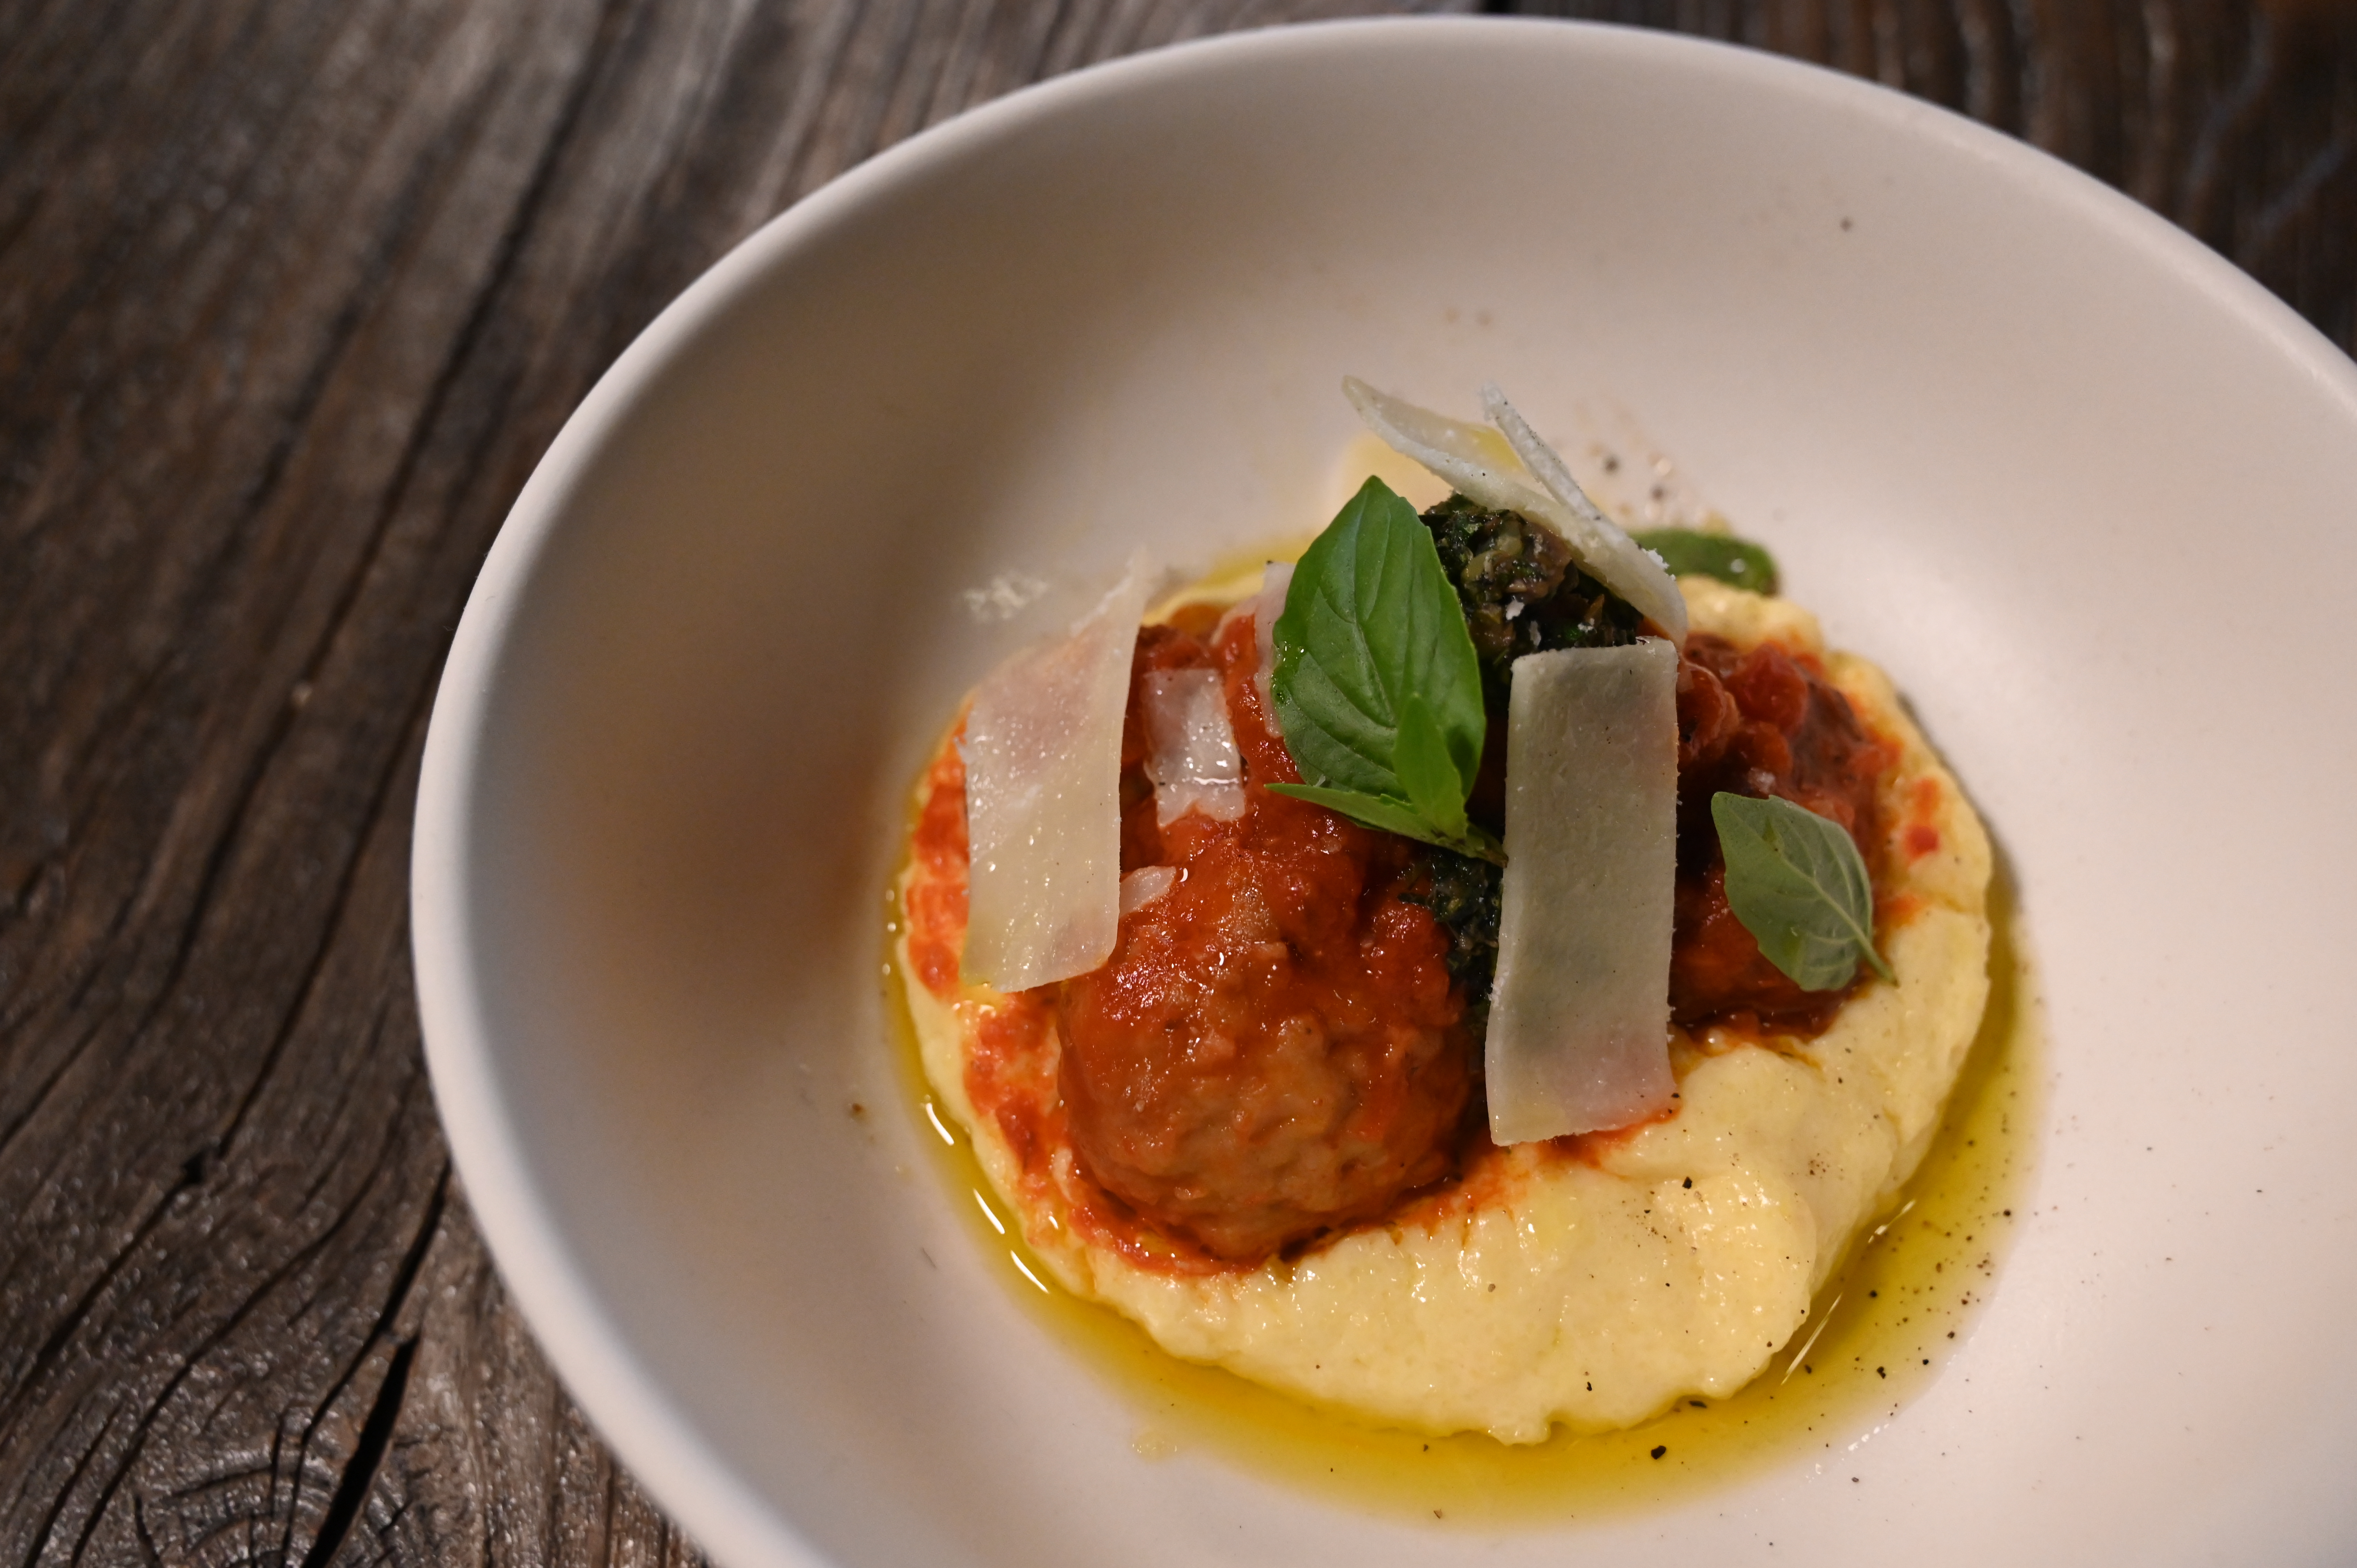 This is a photo of Posto Italian's Veal and Ricotta Meatballs